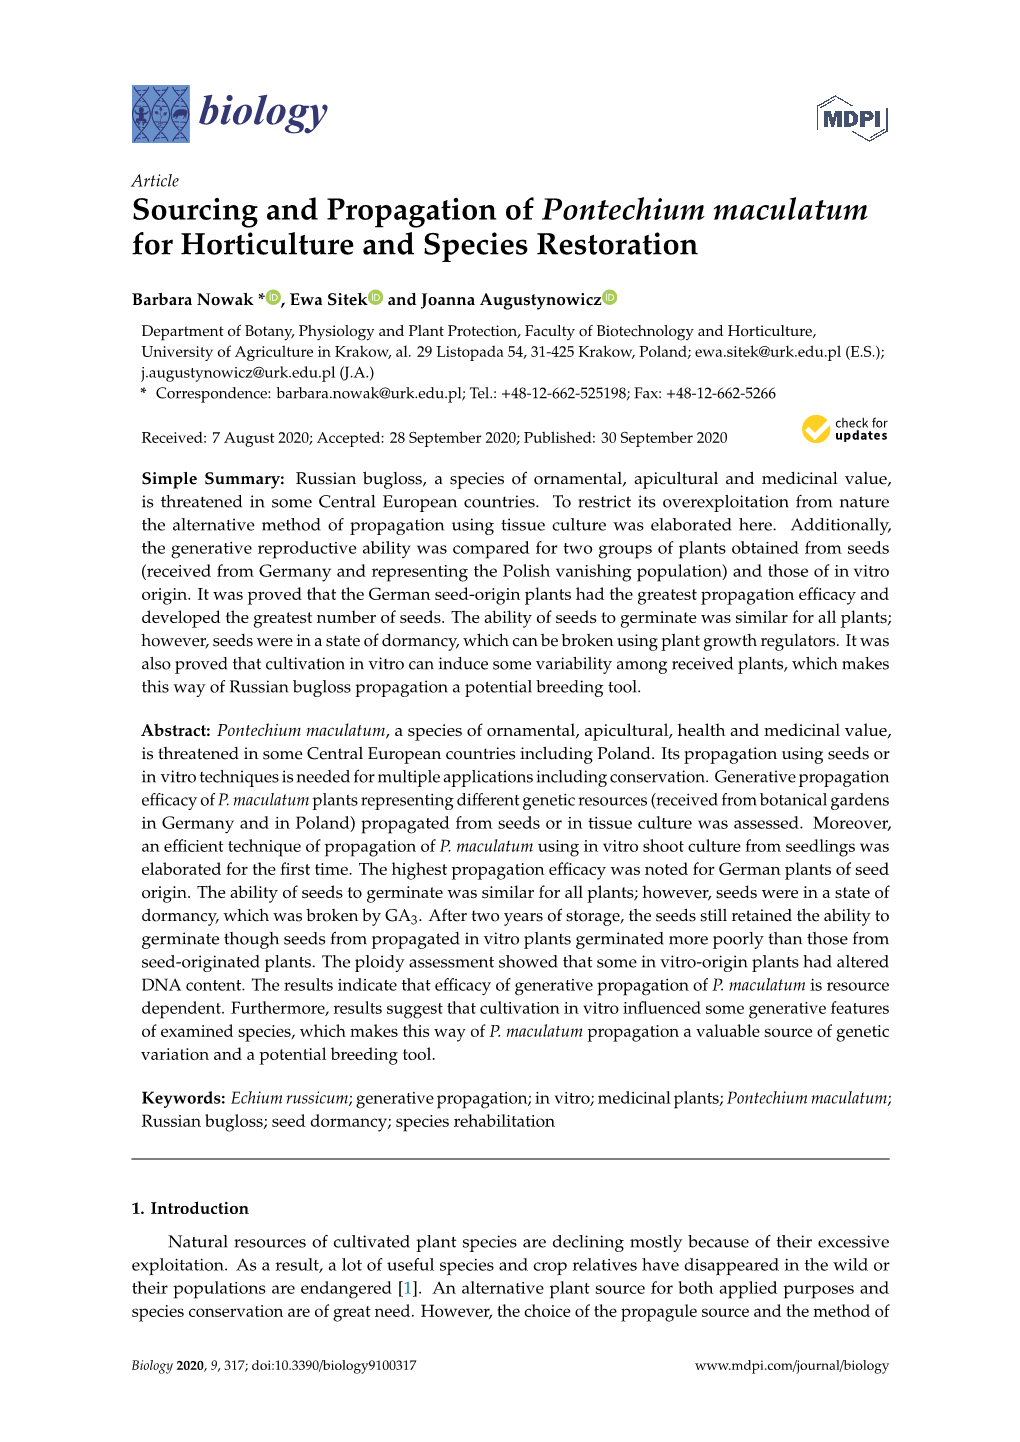 Sourcing and Propagation of Pontechium Maculatum for Horticulture and Species Restoration